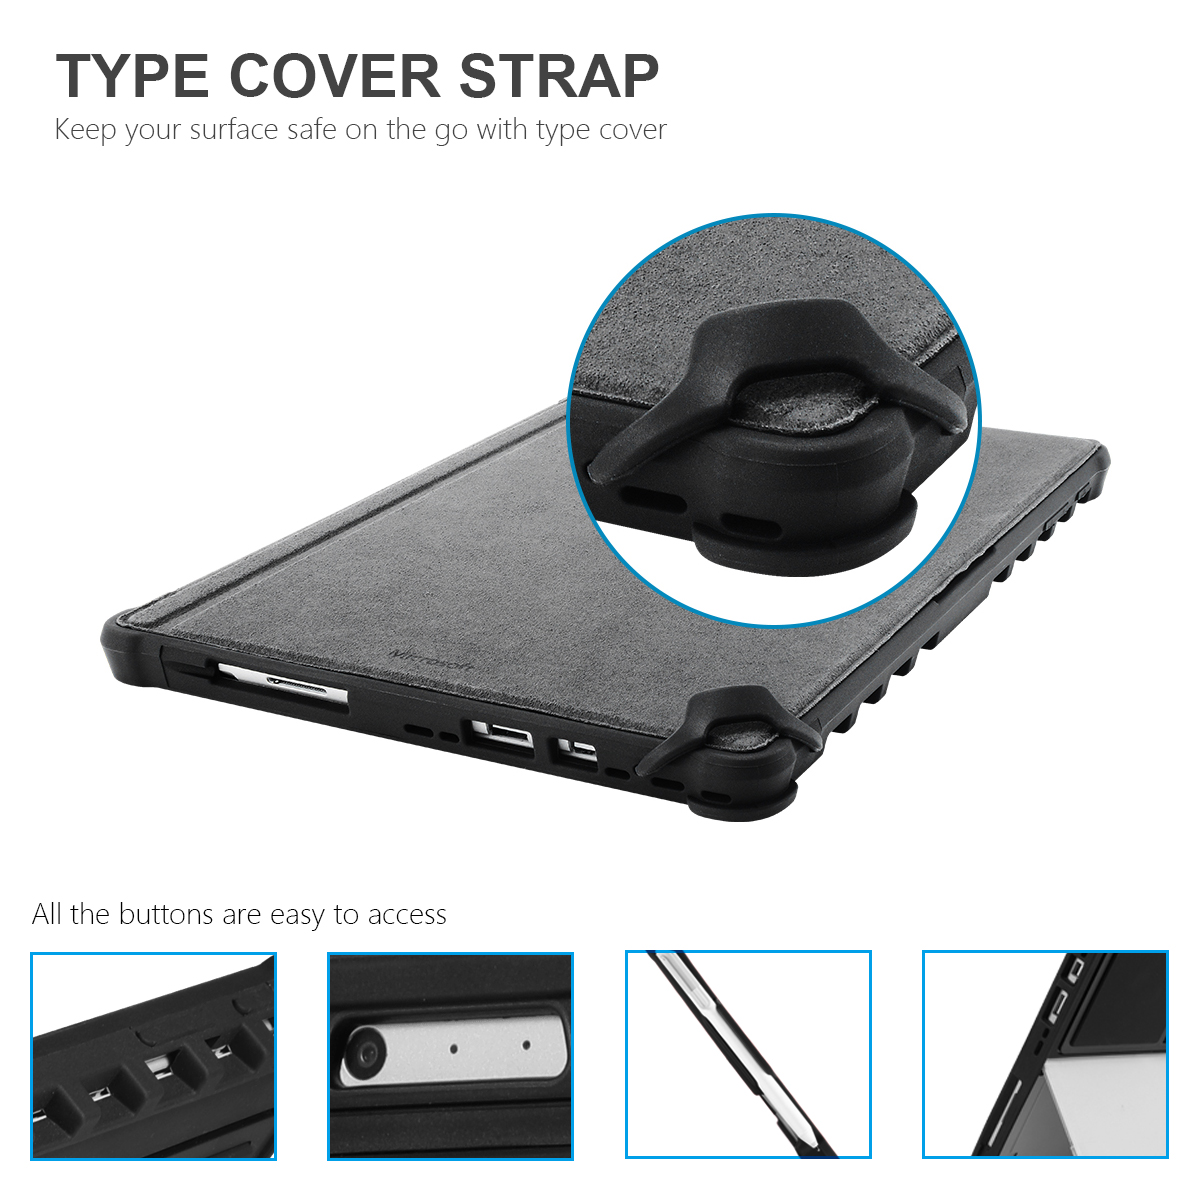 Shockproof Protective Cover Case for Microsoft Surface Pro 7/ Pro 6/ Pro 5/ Pro 4 with hand strap